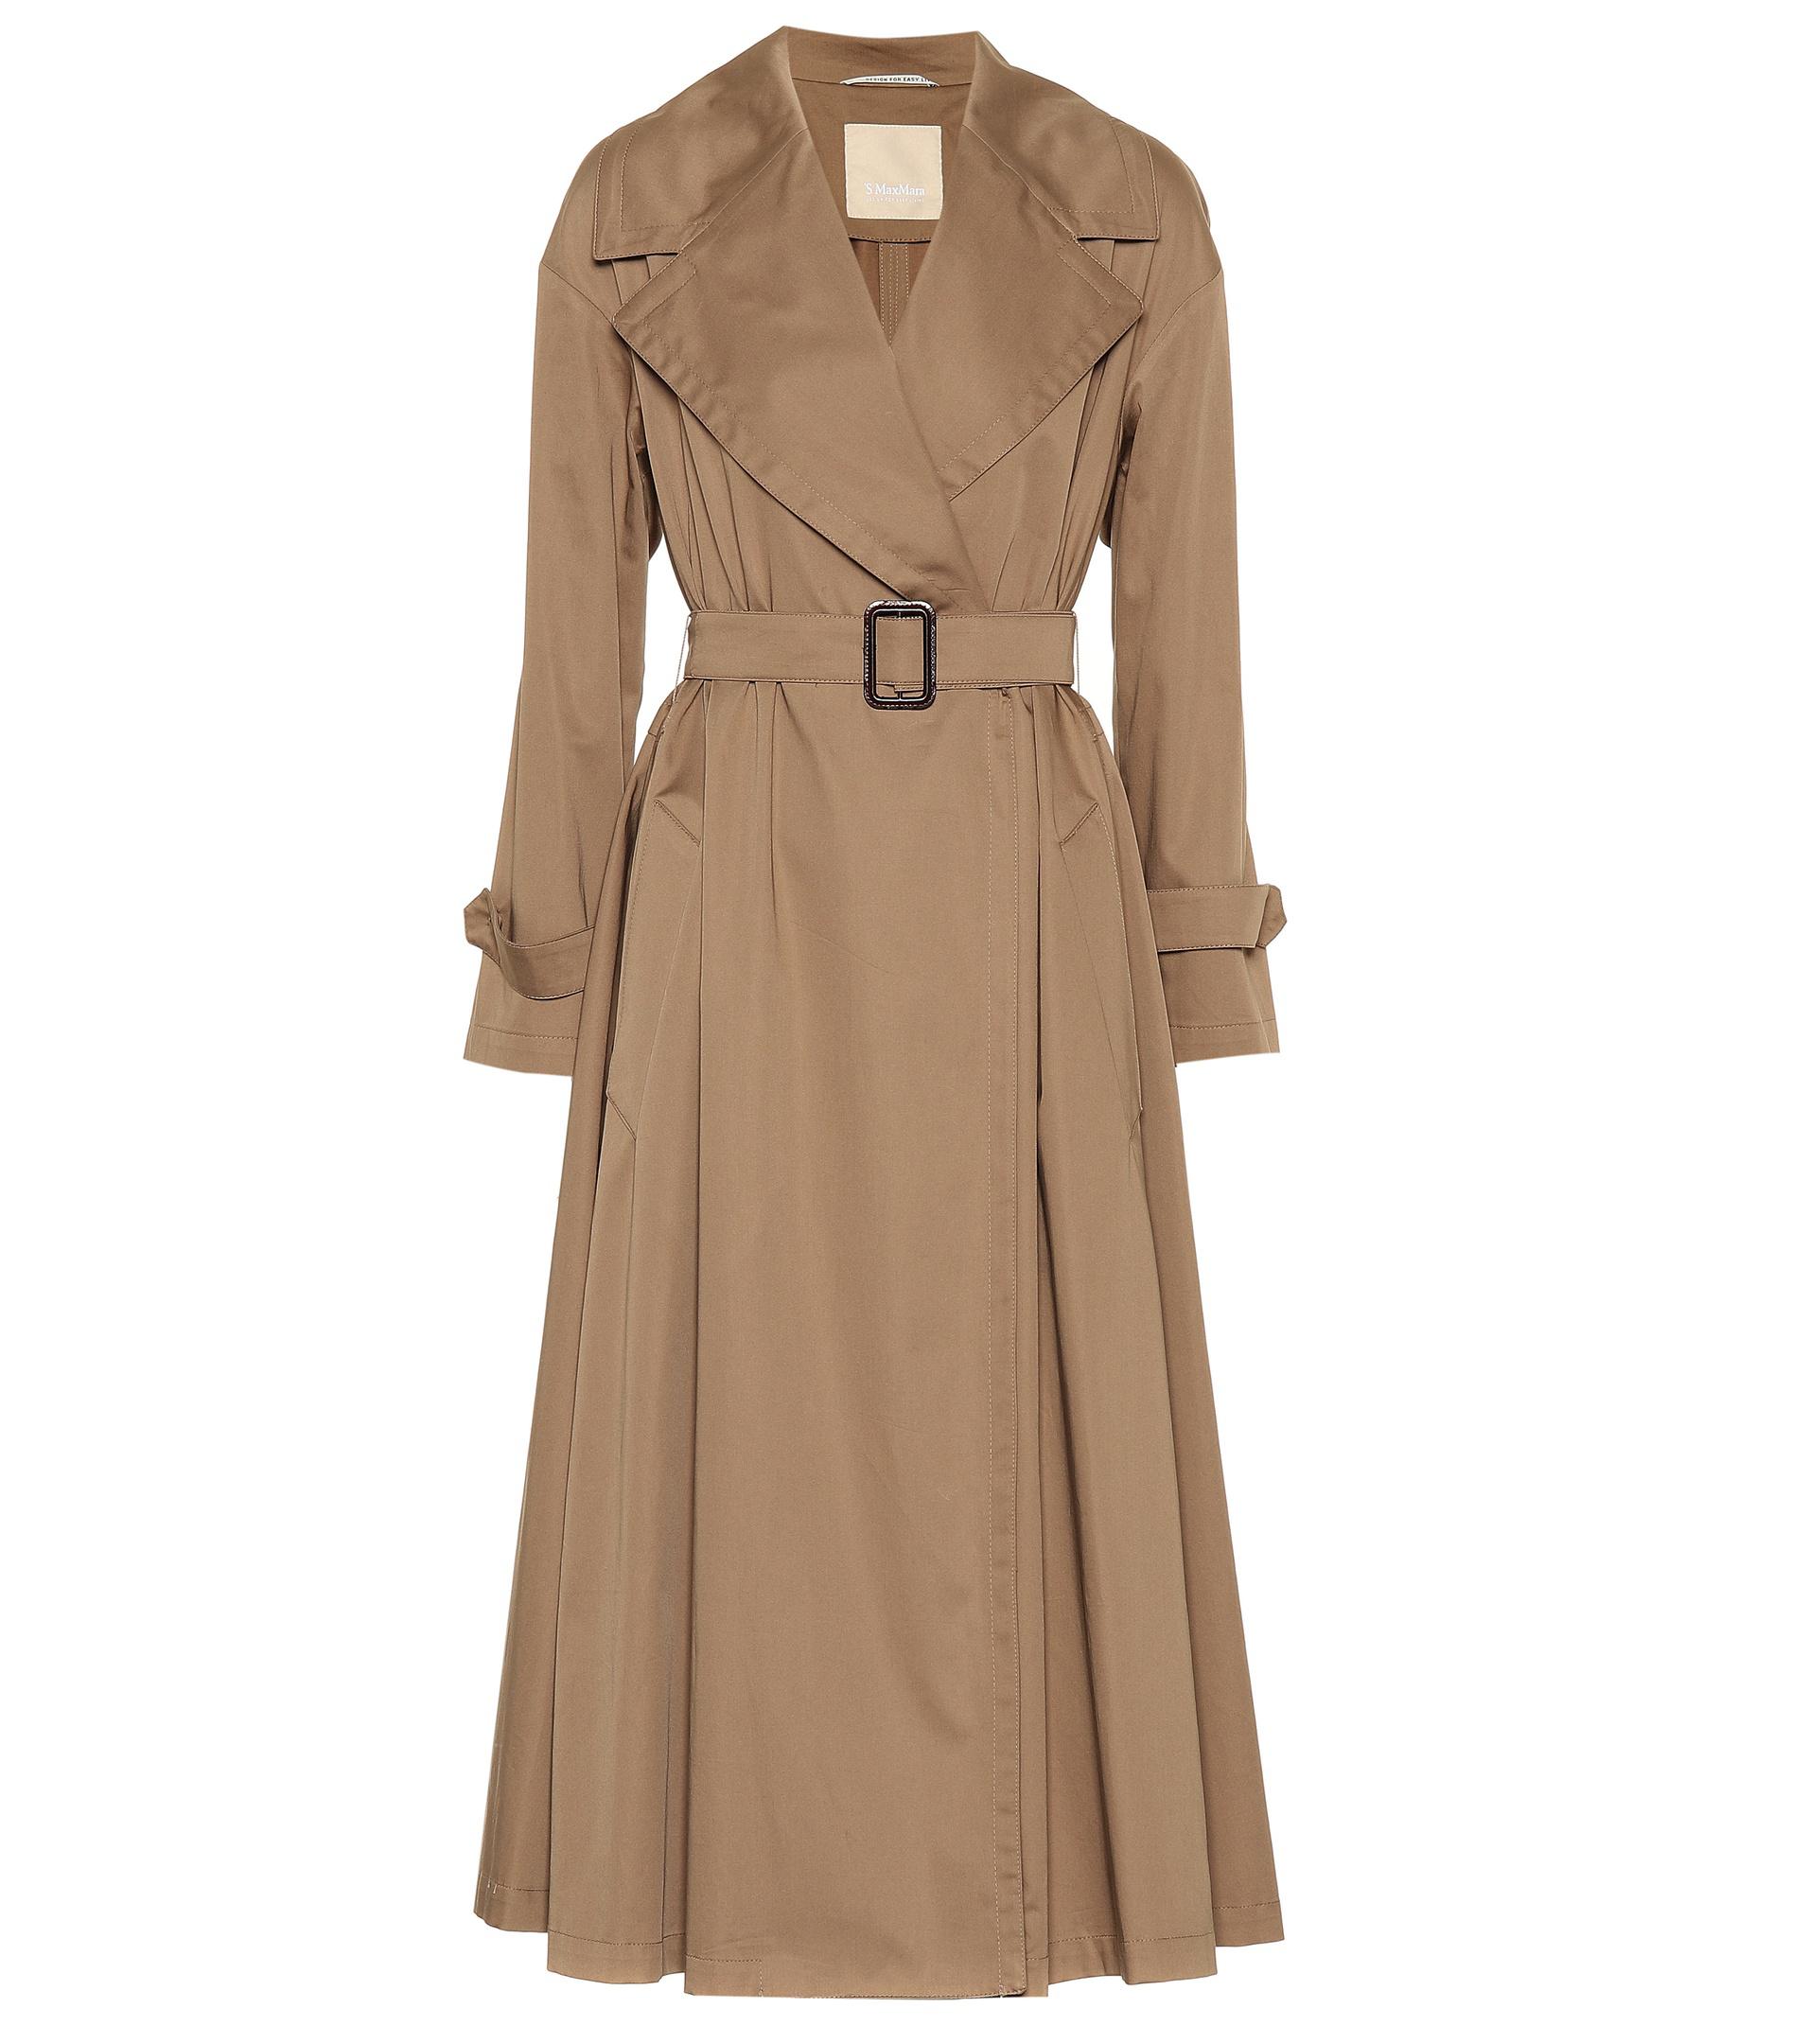 Max Mara Cotton Trench Coat in Beige (Natural) - Lyst